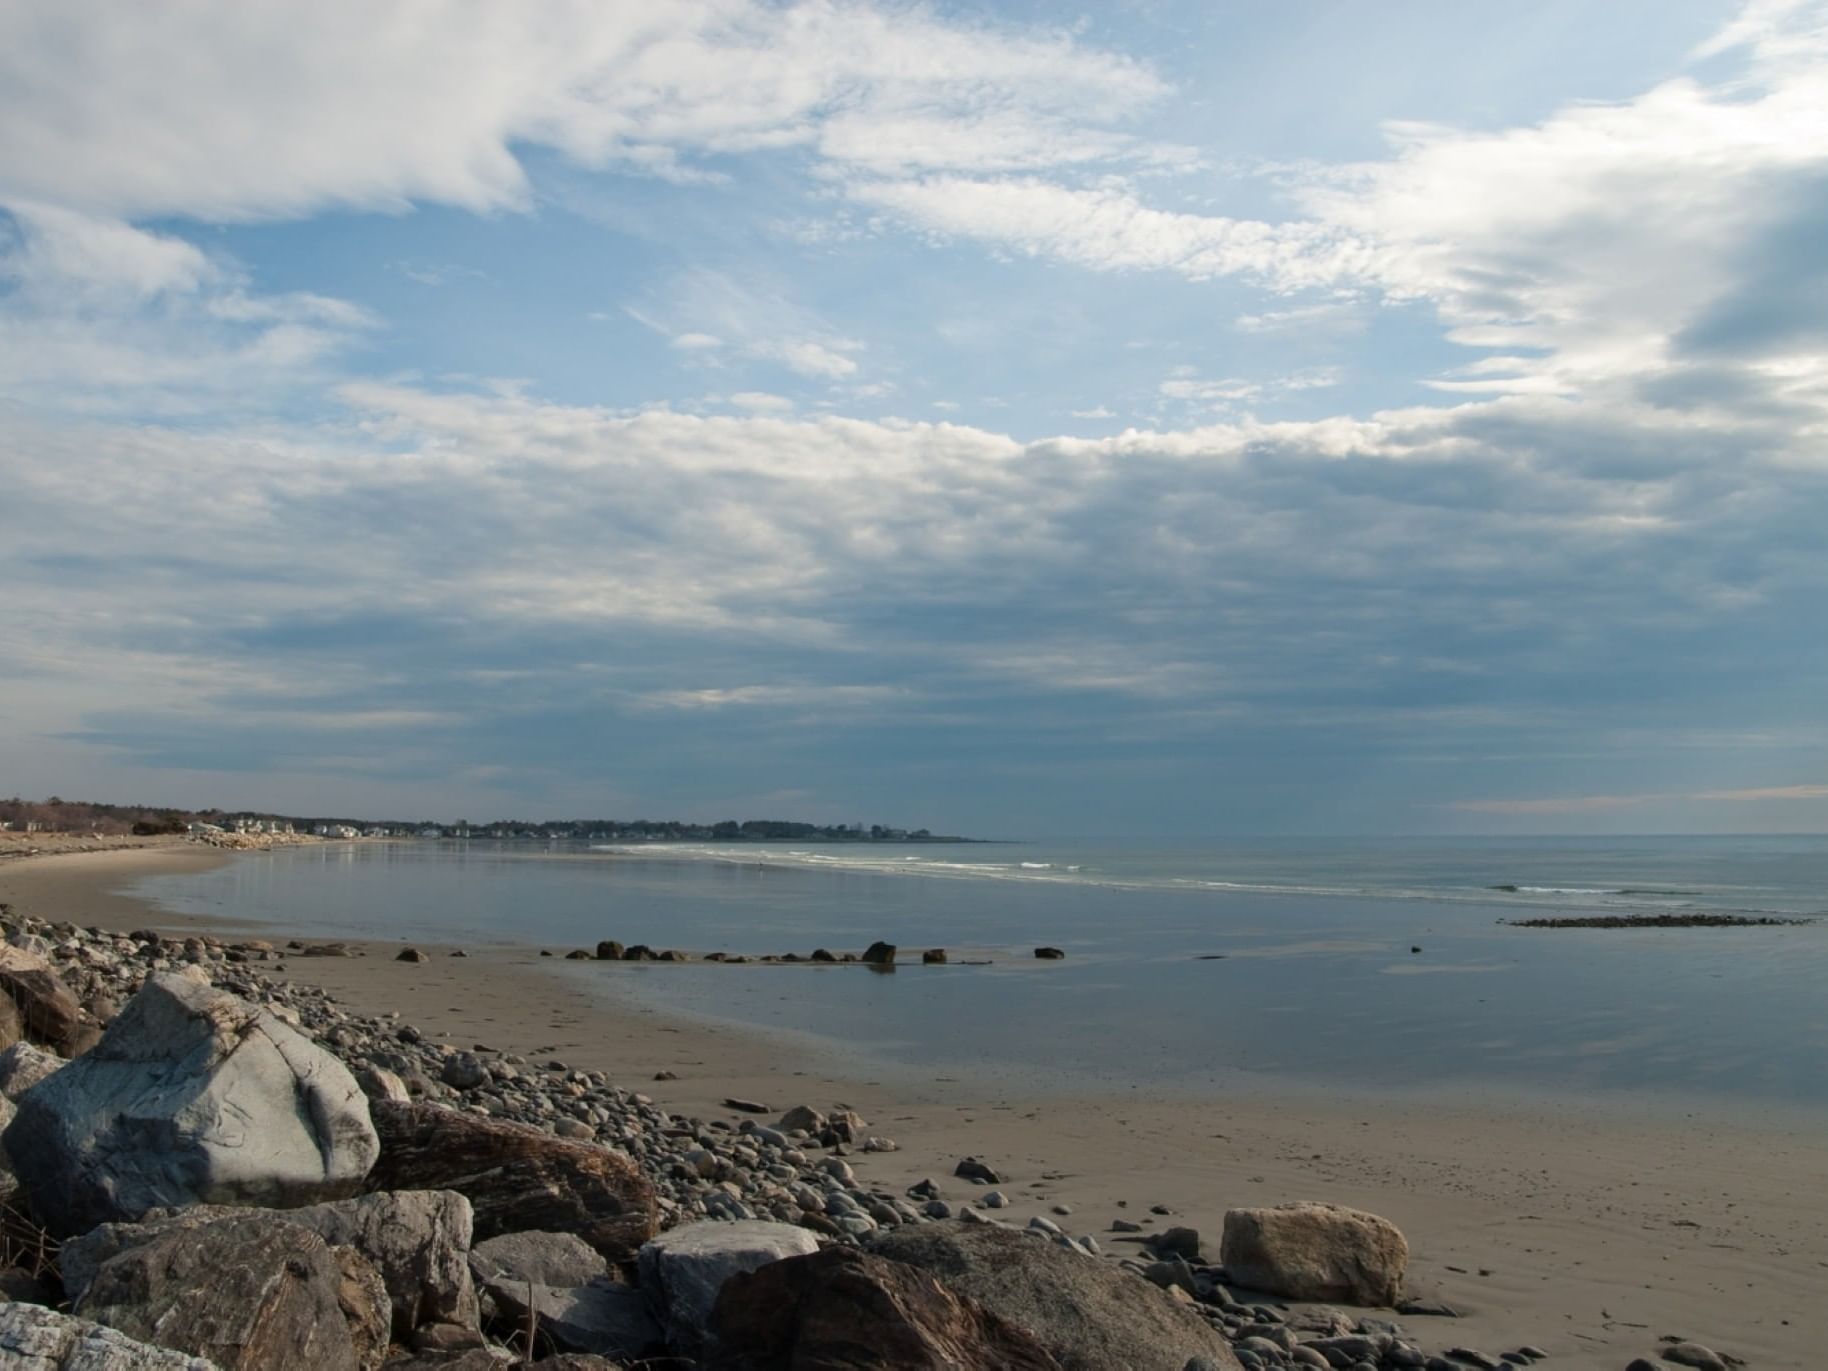 Panoramic view of Moody Beach underneath the picturesque sky with a scenic view near Ogunquit River Inn